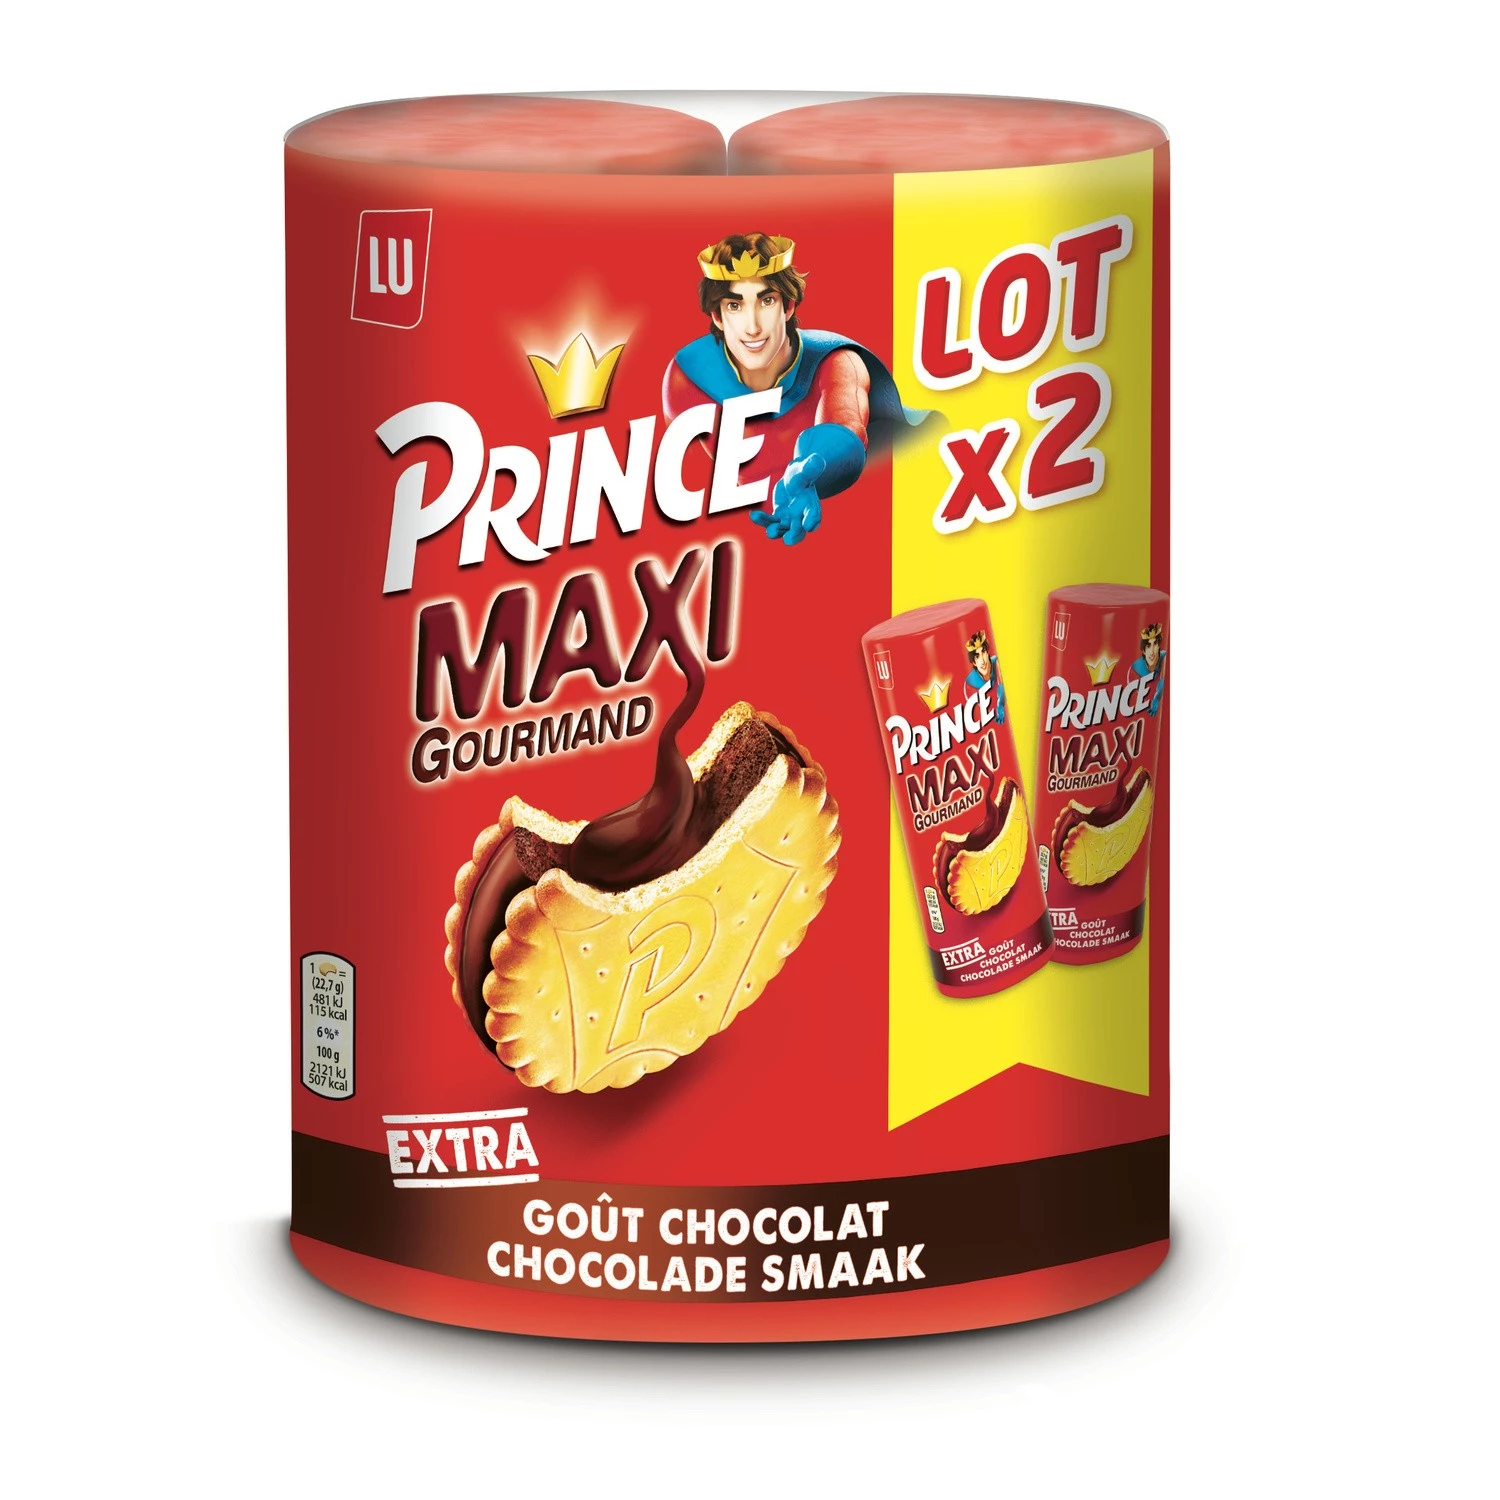 Biscuits Prince maxi gourmand extra chocolat 2x250g - PRINCE